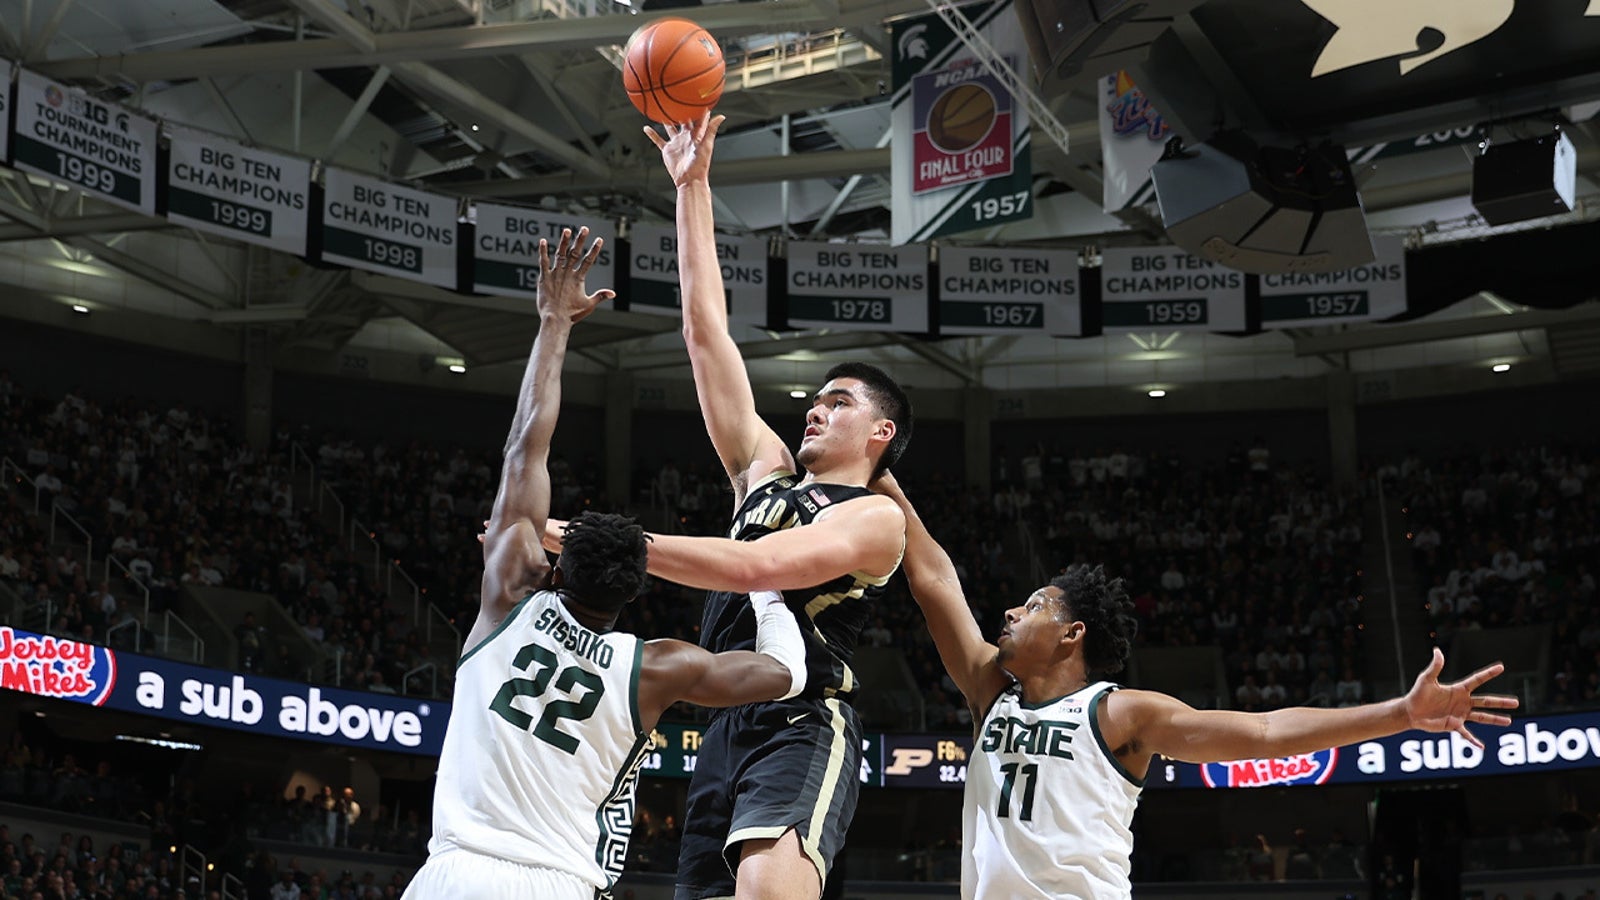 Purdue's Zach Edey steals the show with a career-high 32 points, 17 rebounds in a nail-biting win over Michigan State